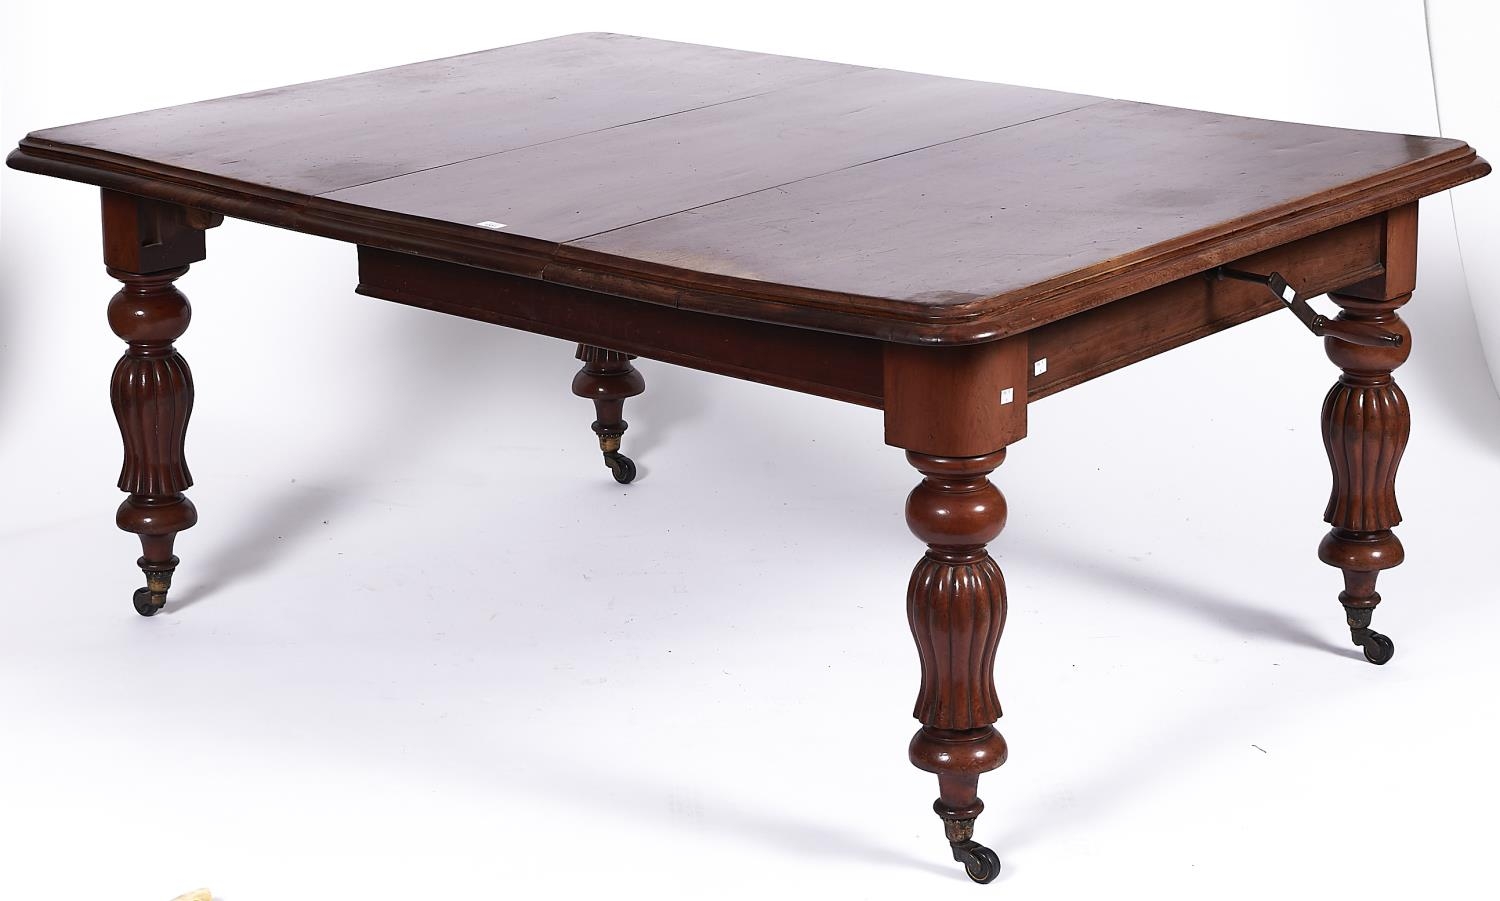 A Victorian mahogany single leaf extending dining table, the rounded rectangular top with moulded